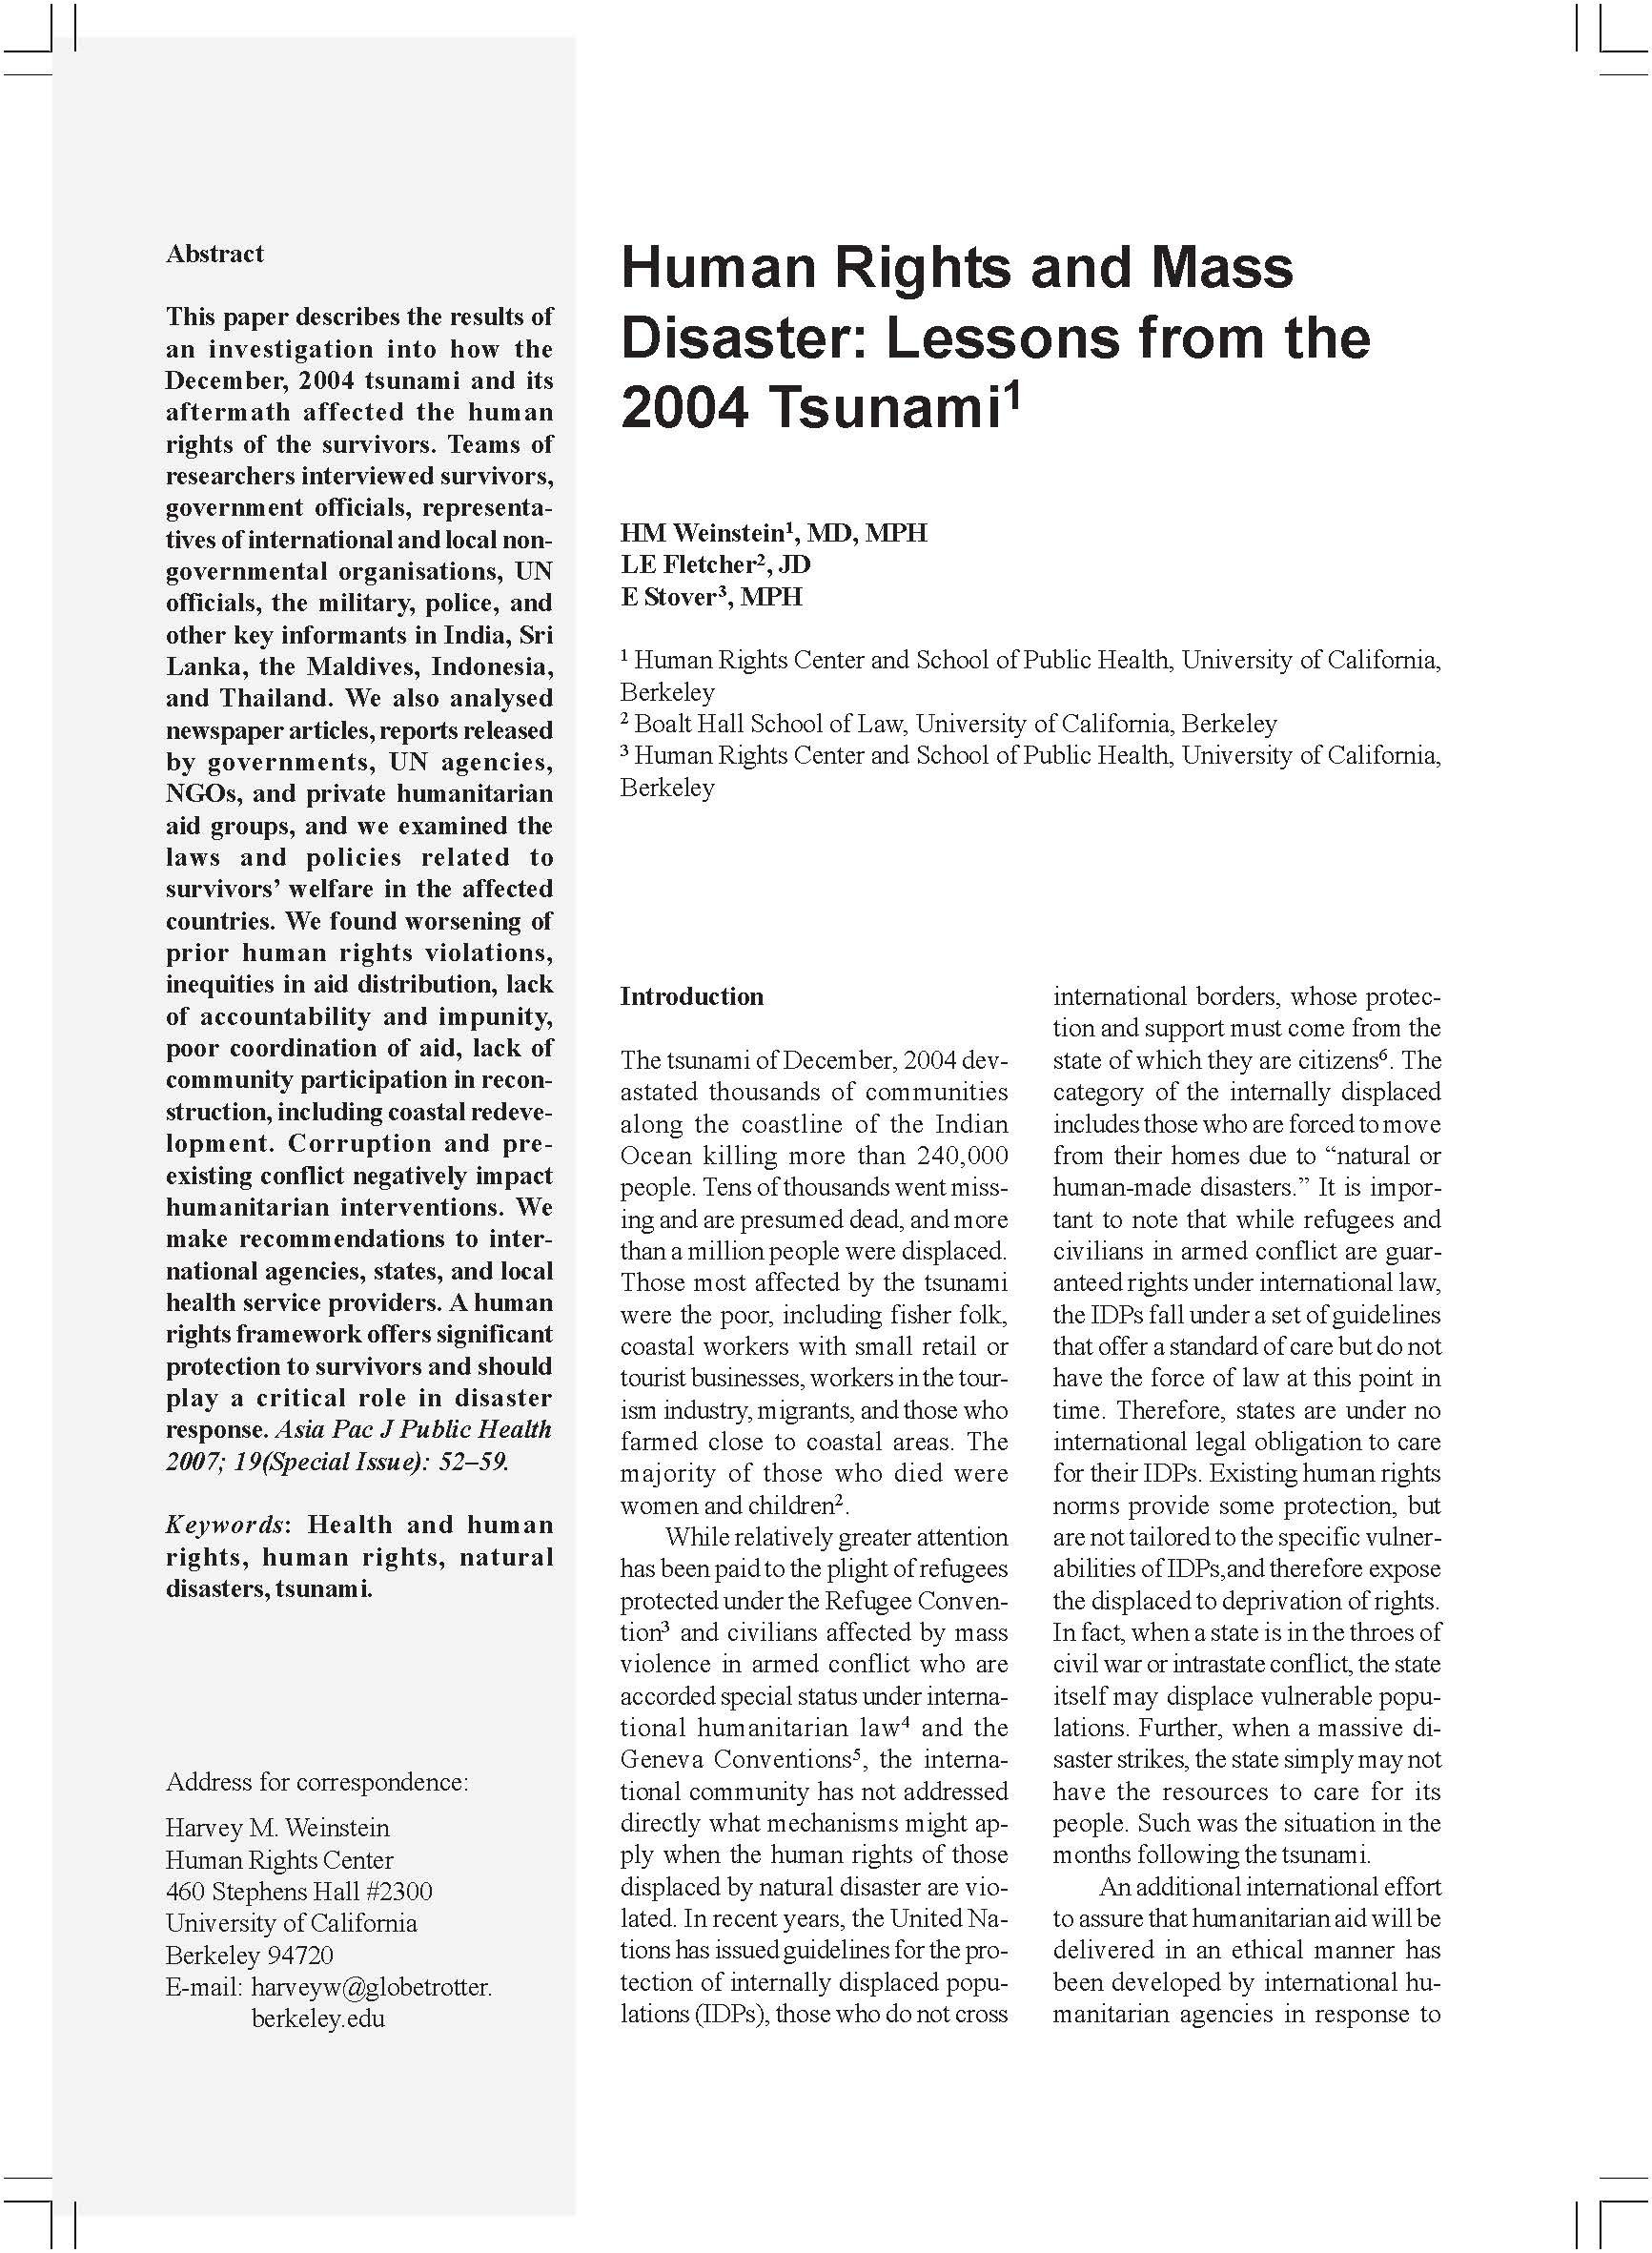 Pages from Human rights and mass disaster lessons from the 2004 tsunami